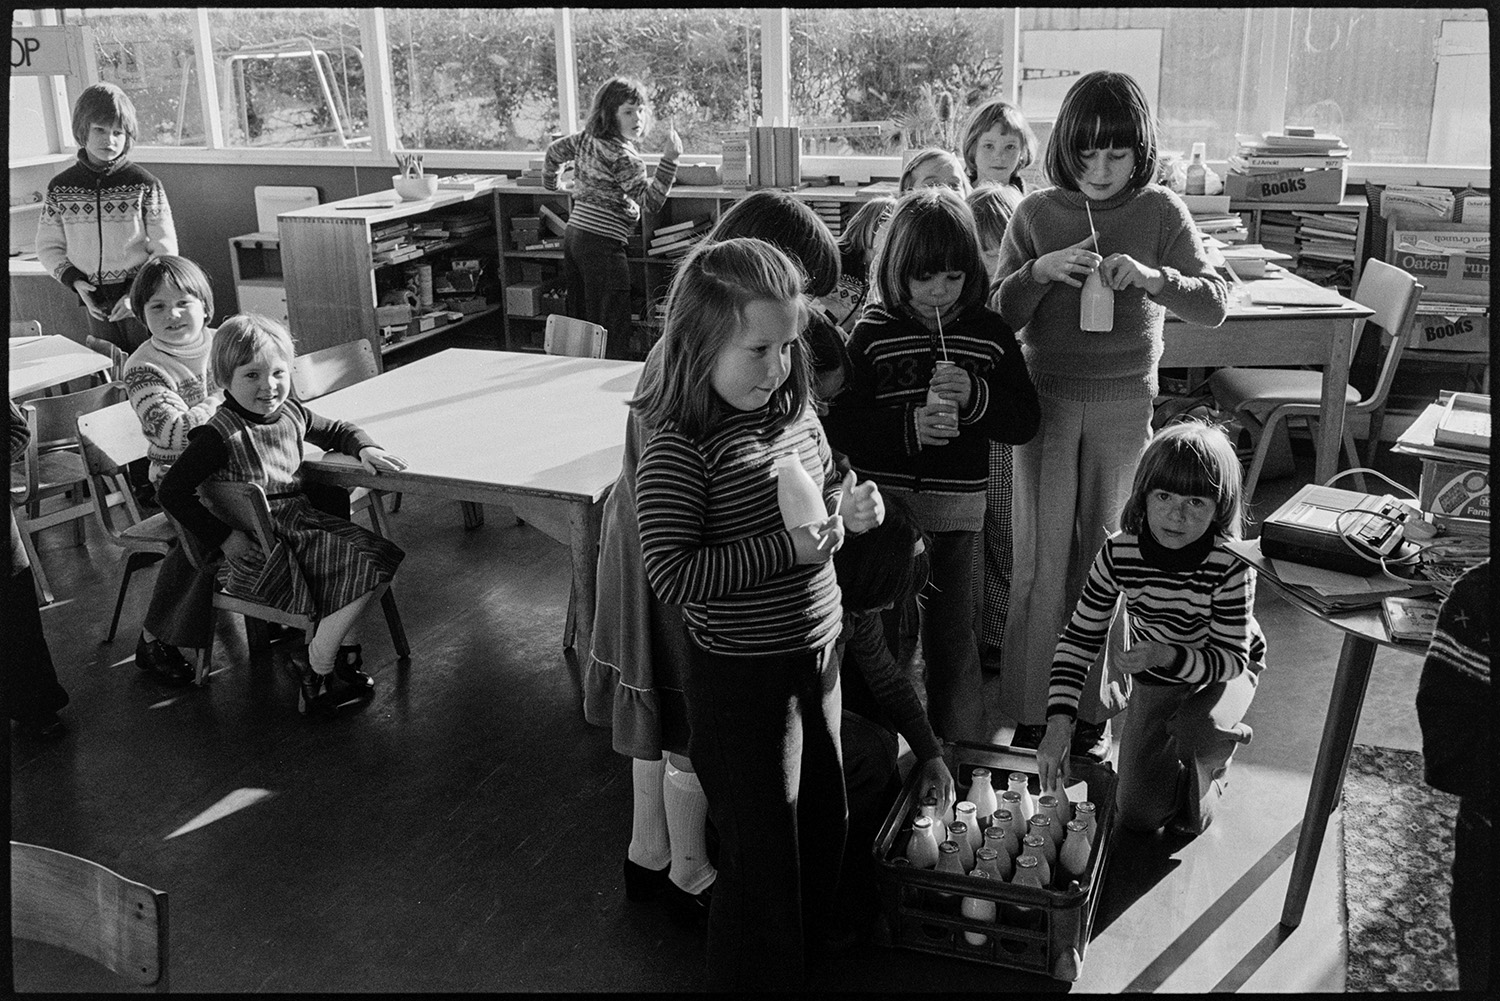 Primary school classroom with headmistress teaching, views of full classroom. 
[Schoolchildren taking their bottles of free milk from a crate, in a classroom at Burrington Primary School.]